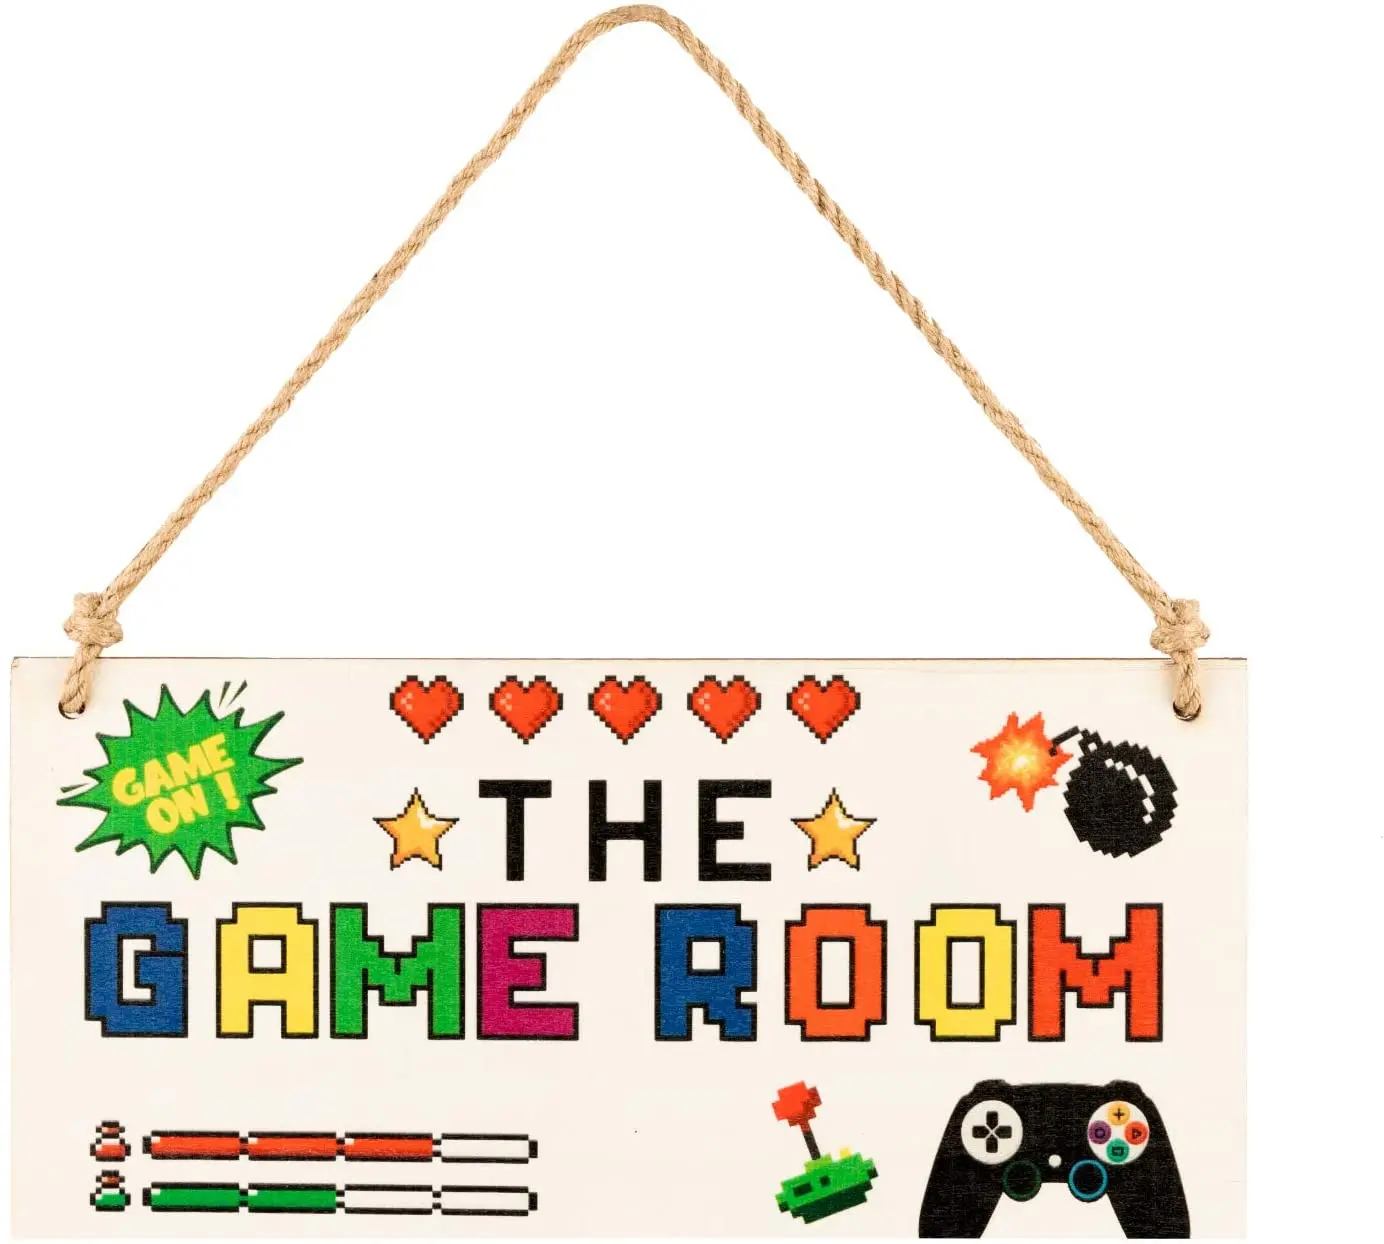 

Fun Game Room Sign Gamer Room Decor for Teen Boys Bedroom Playroom Gaming Area, Vintage Rustic Wooden Plaques Printed Hanging